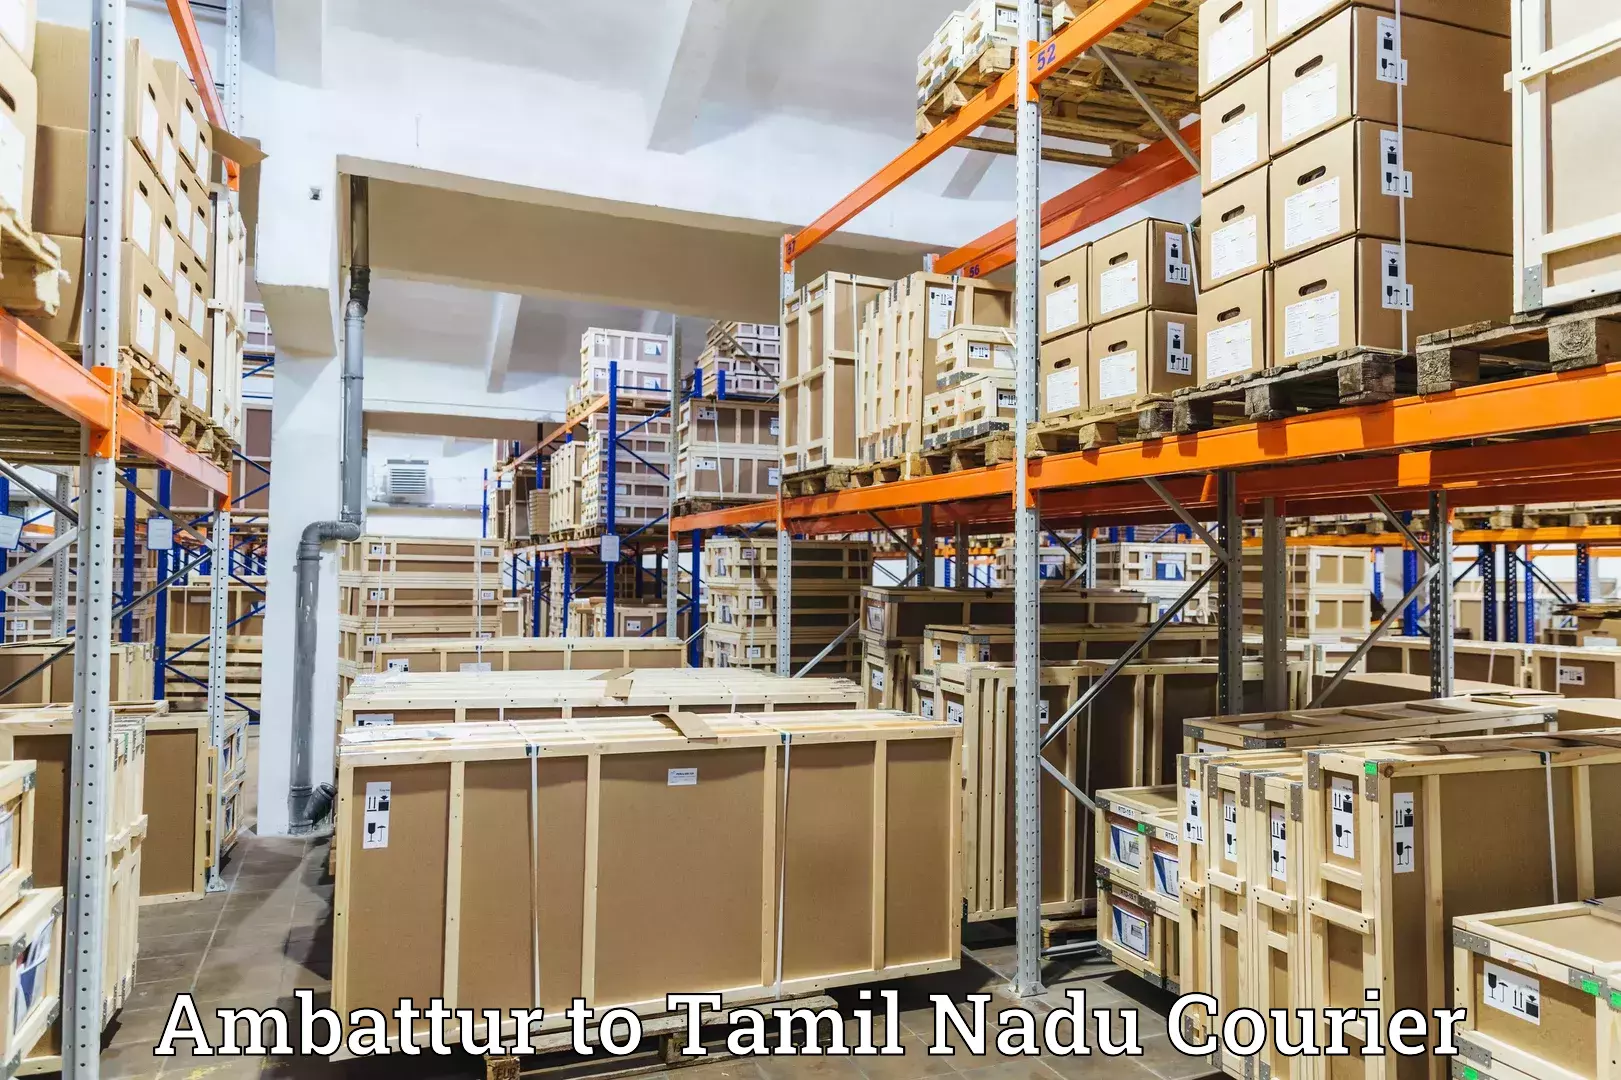 Round-the-clock parcel delivery in Ambattur to Mylapore